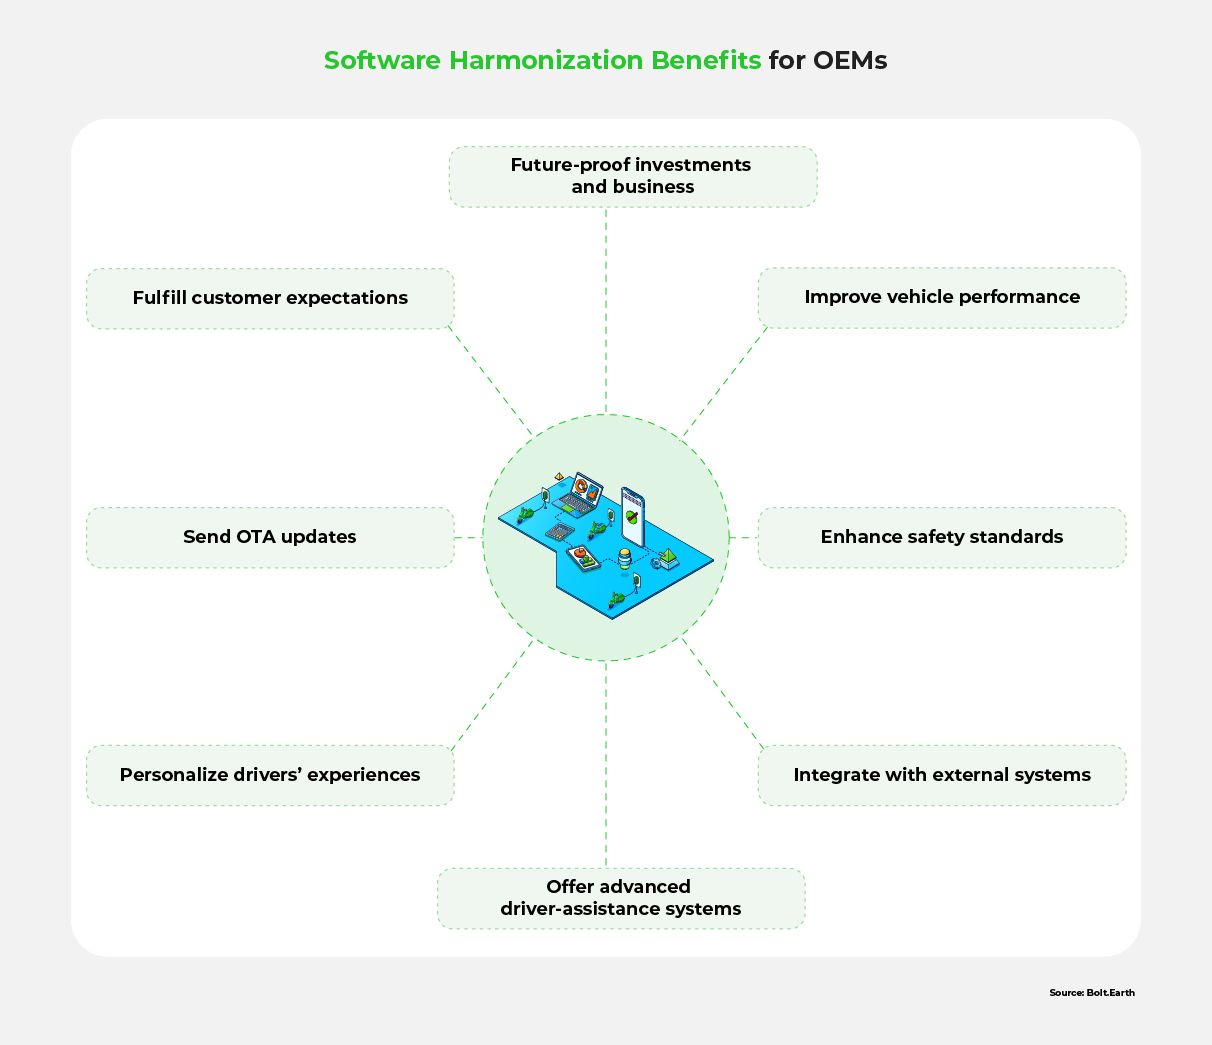 An infographic detailing how OEMs can benefit from harmonizing disparate software elements